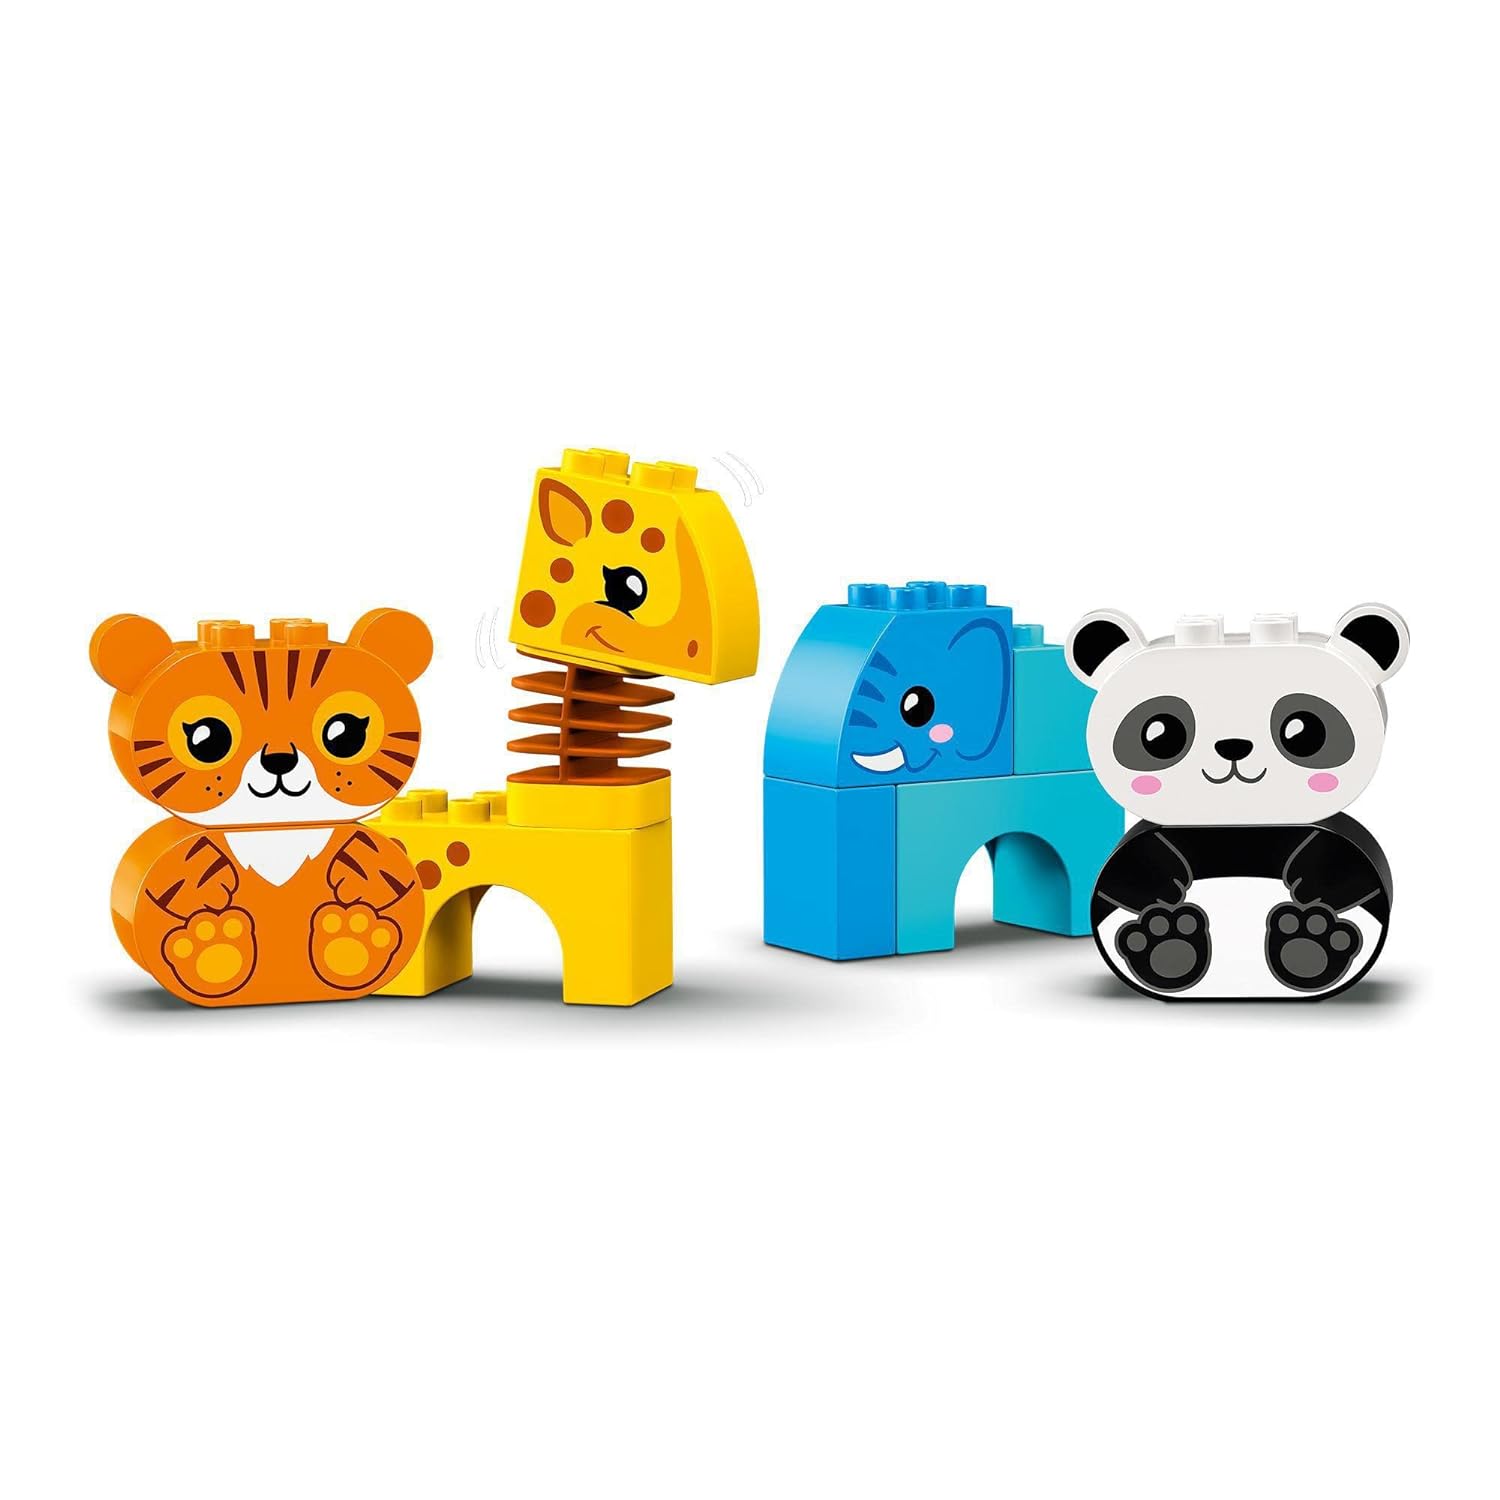 LEGO Duplo My First Animal Train Building Kit for Ages 2+